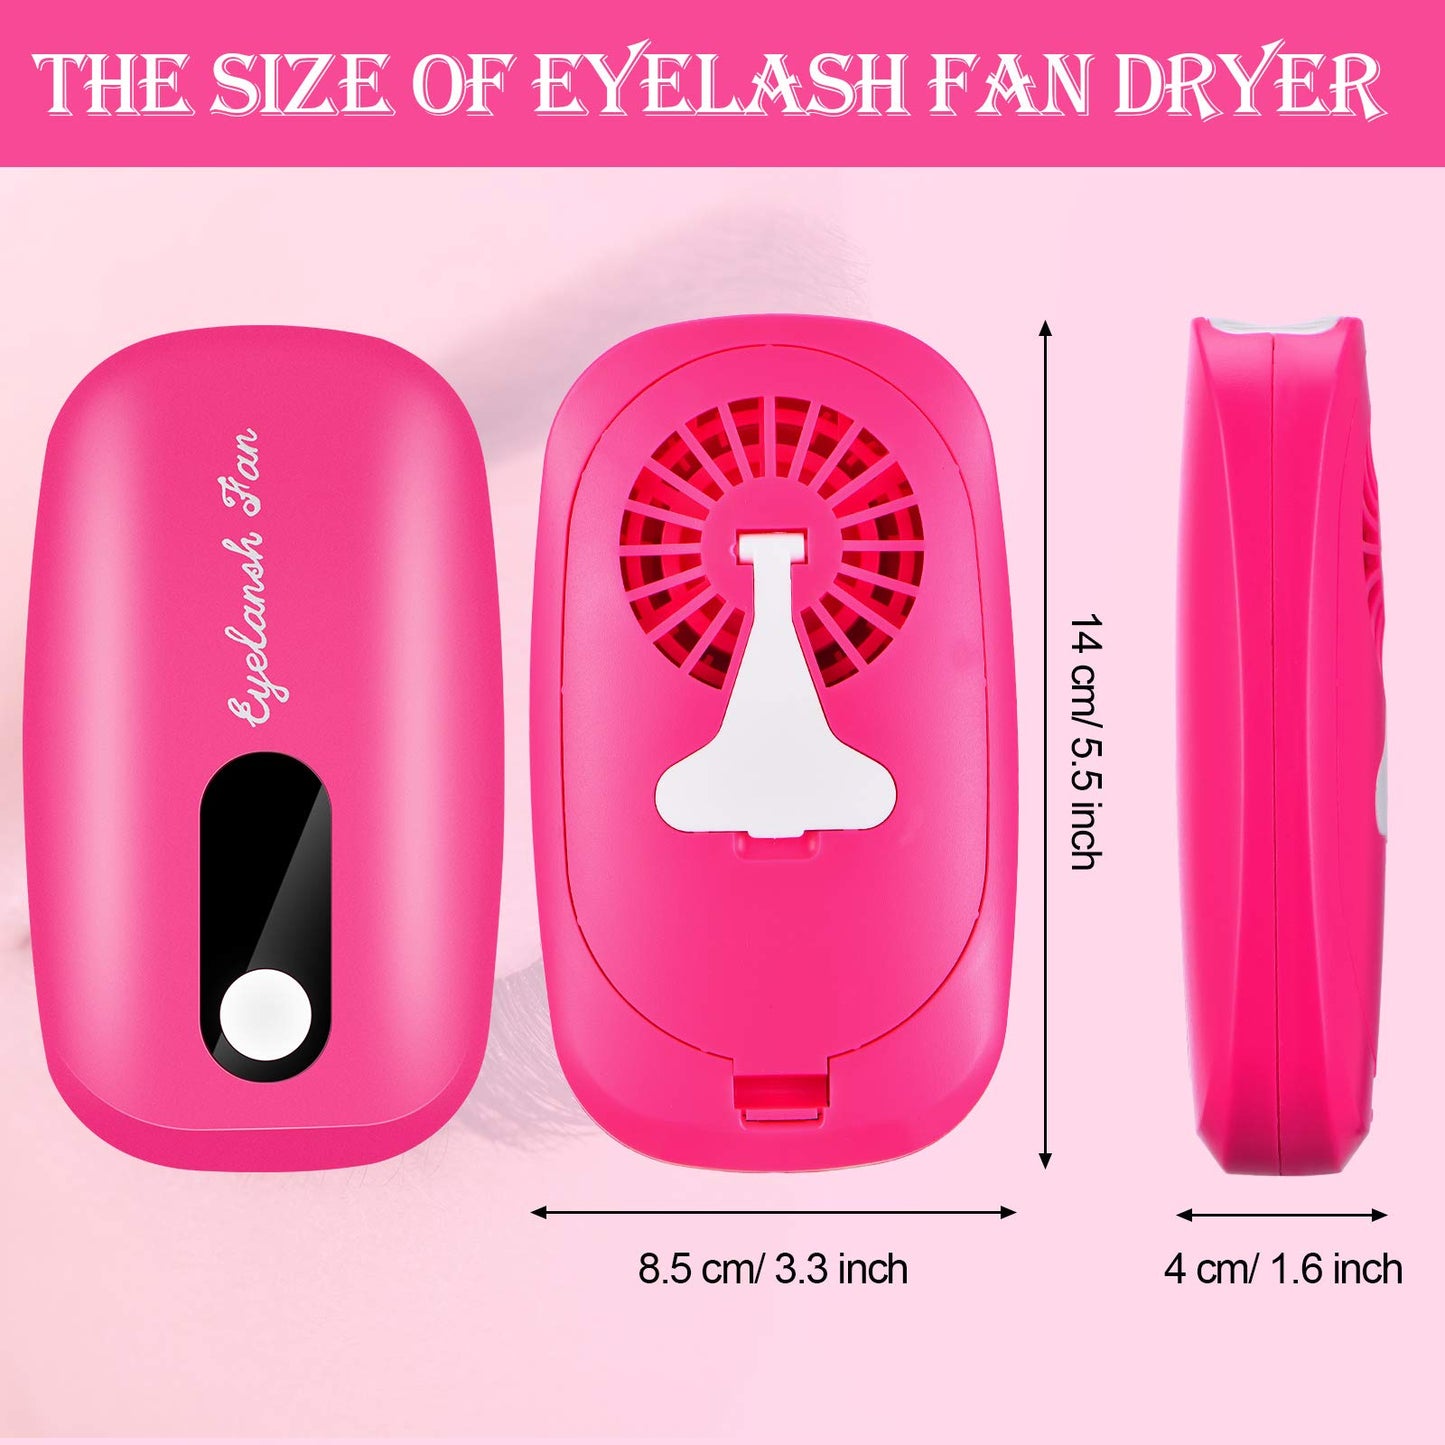 Honoson 2 Pieces Eyelash Fan Dryer USB Mini Portable Fans Rechargeable Electric Bladeless Air Conditioning Refrigeration Blower Dryer Fan for Eyelash Extension